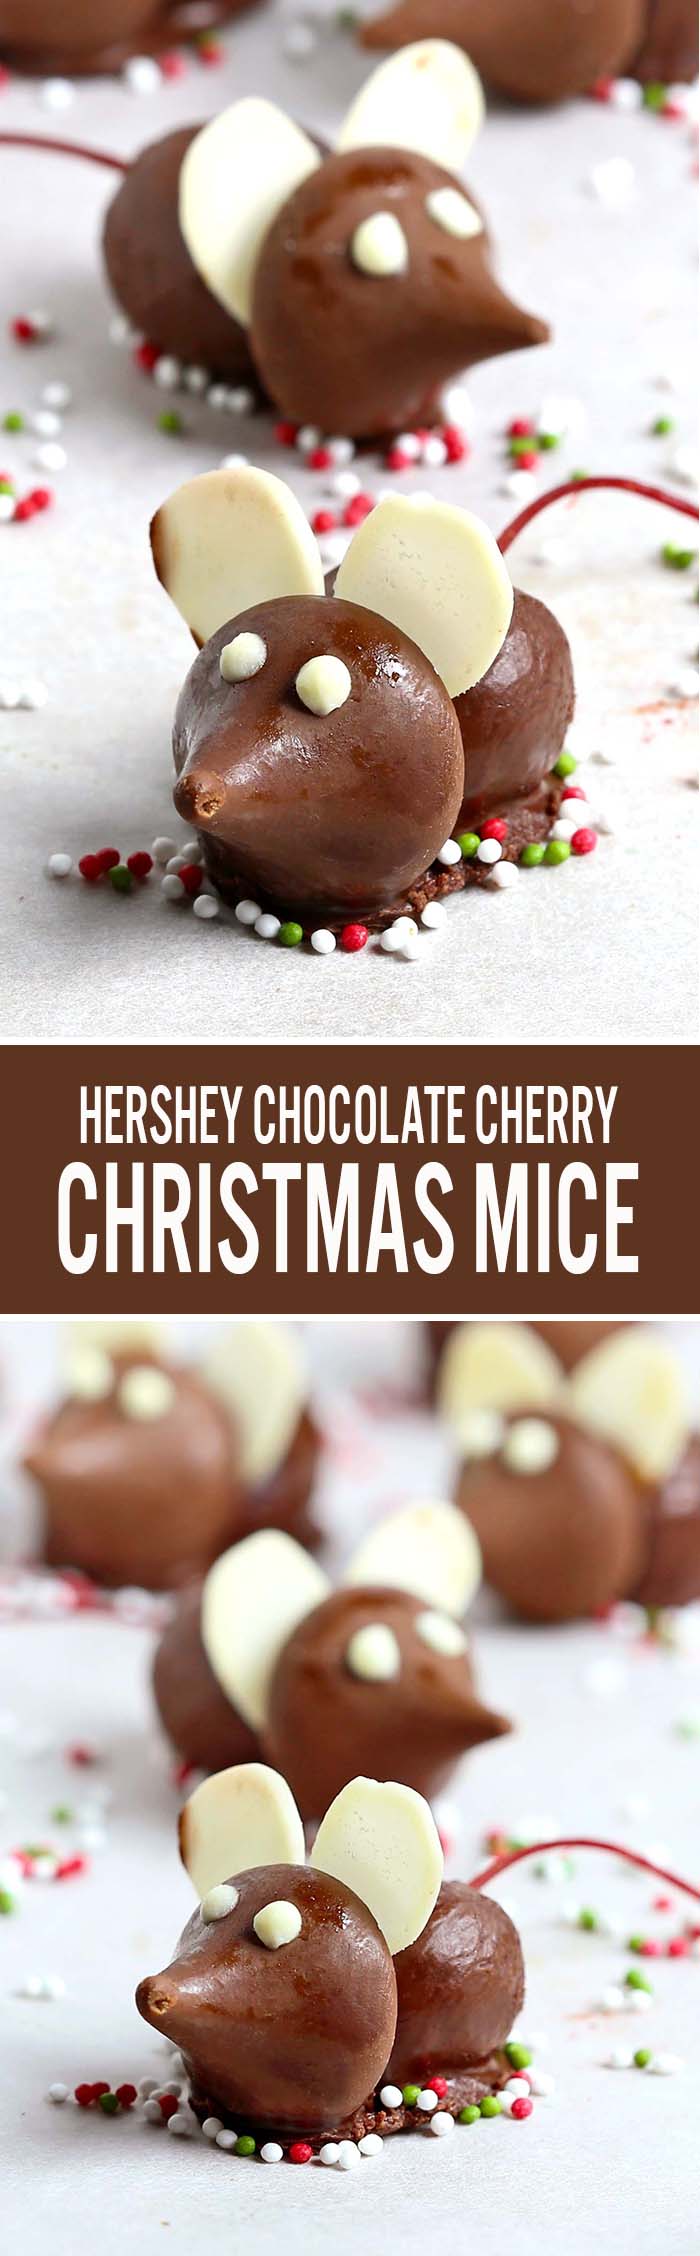 These fun Chocolate Cherry Christmas Mice made from chocolate covered cherries with almond slices and Hershey’s Kisses, are a great addition to your Christmas table.